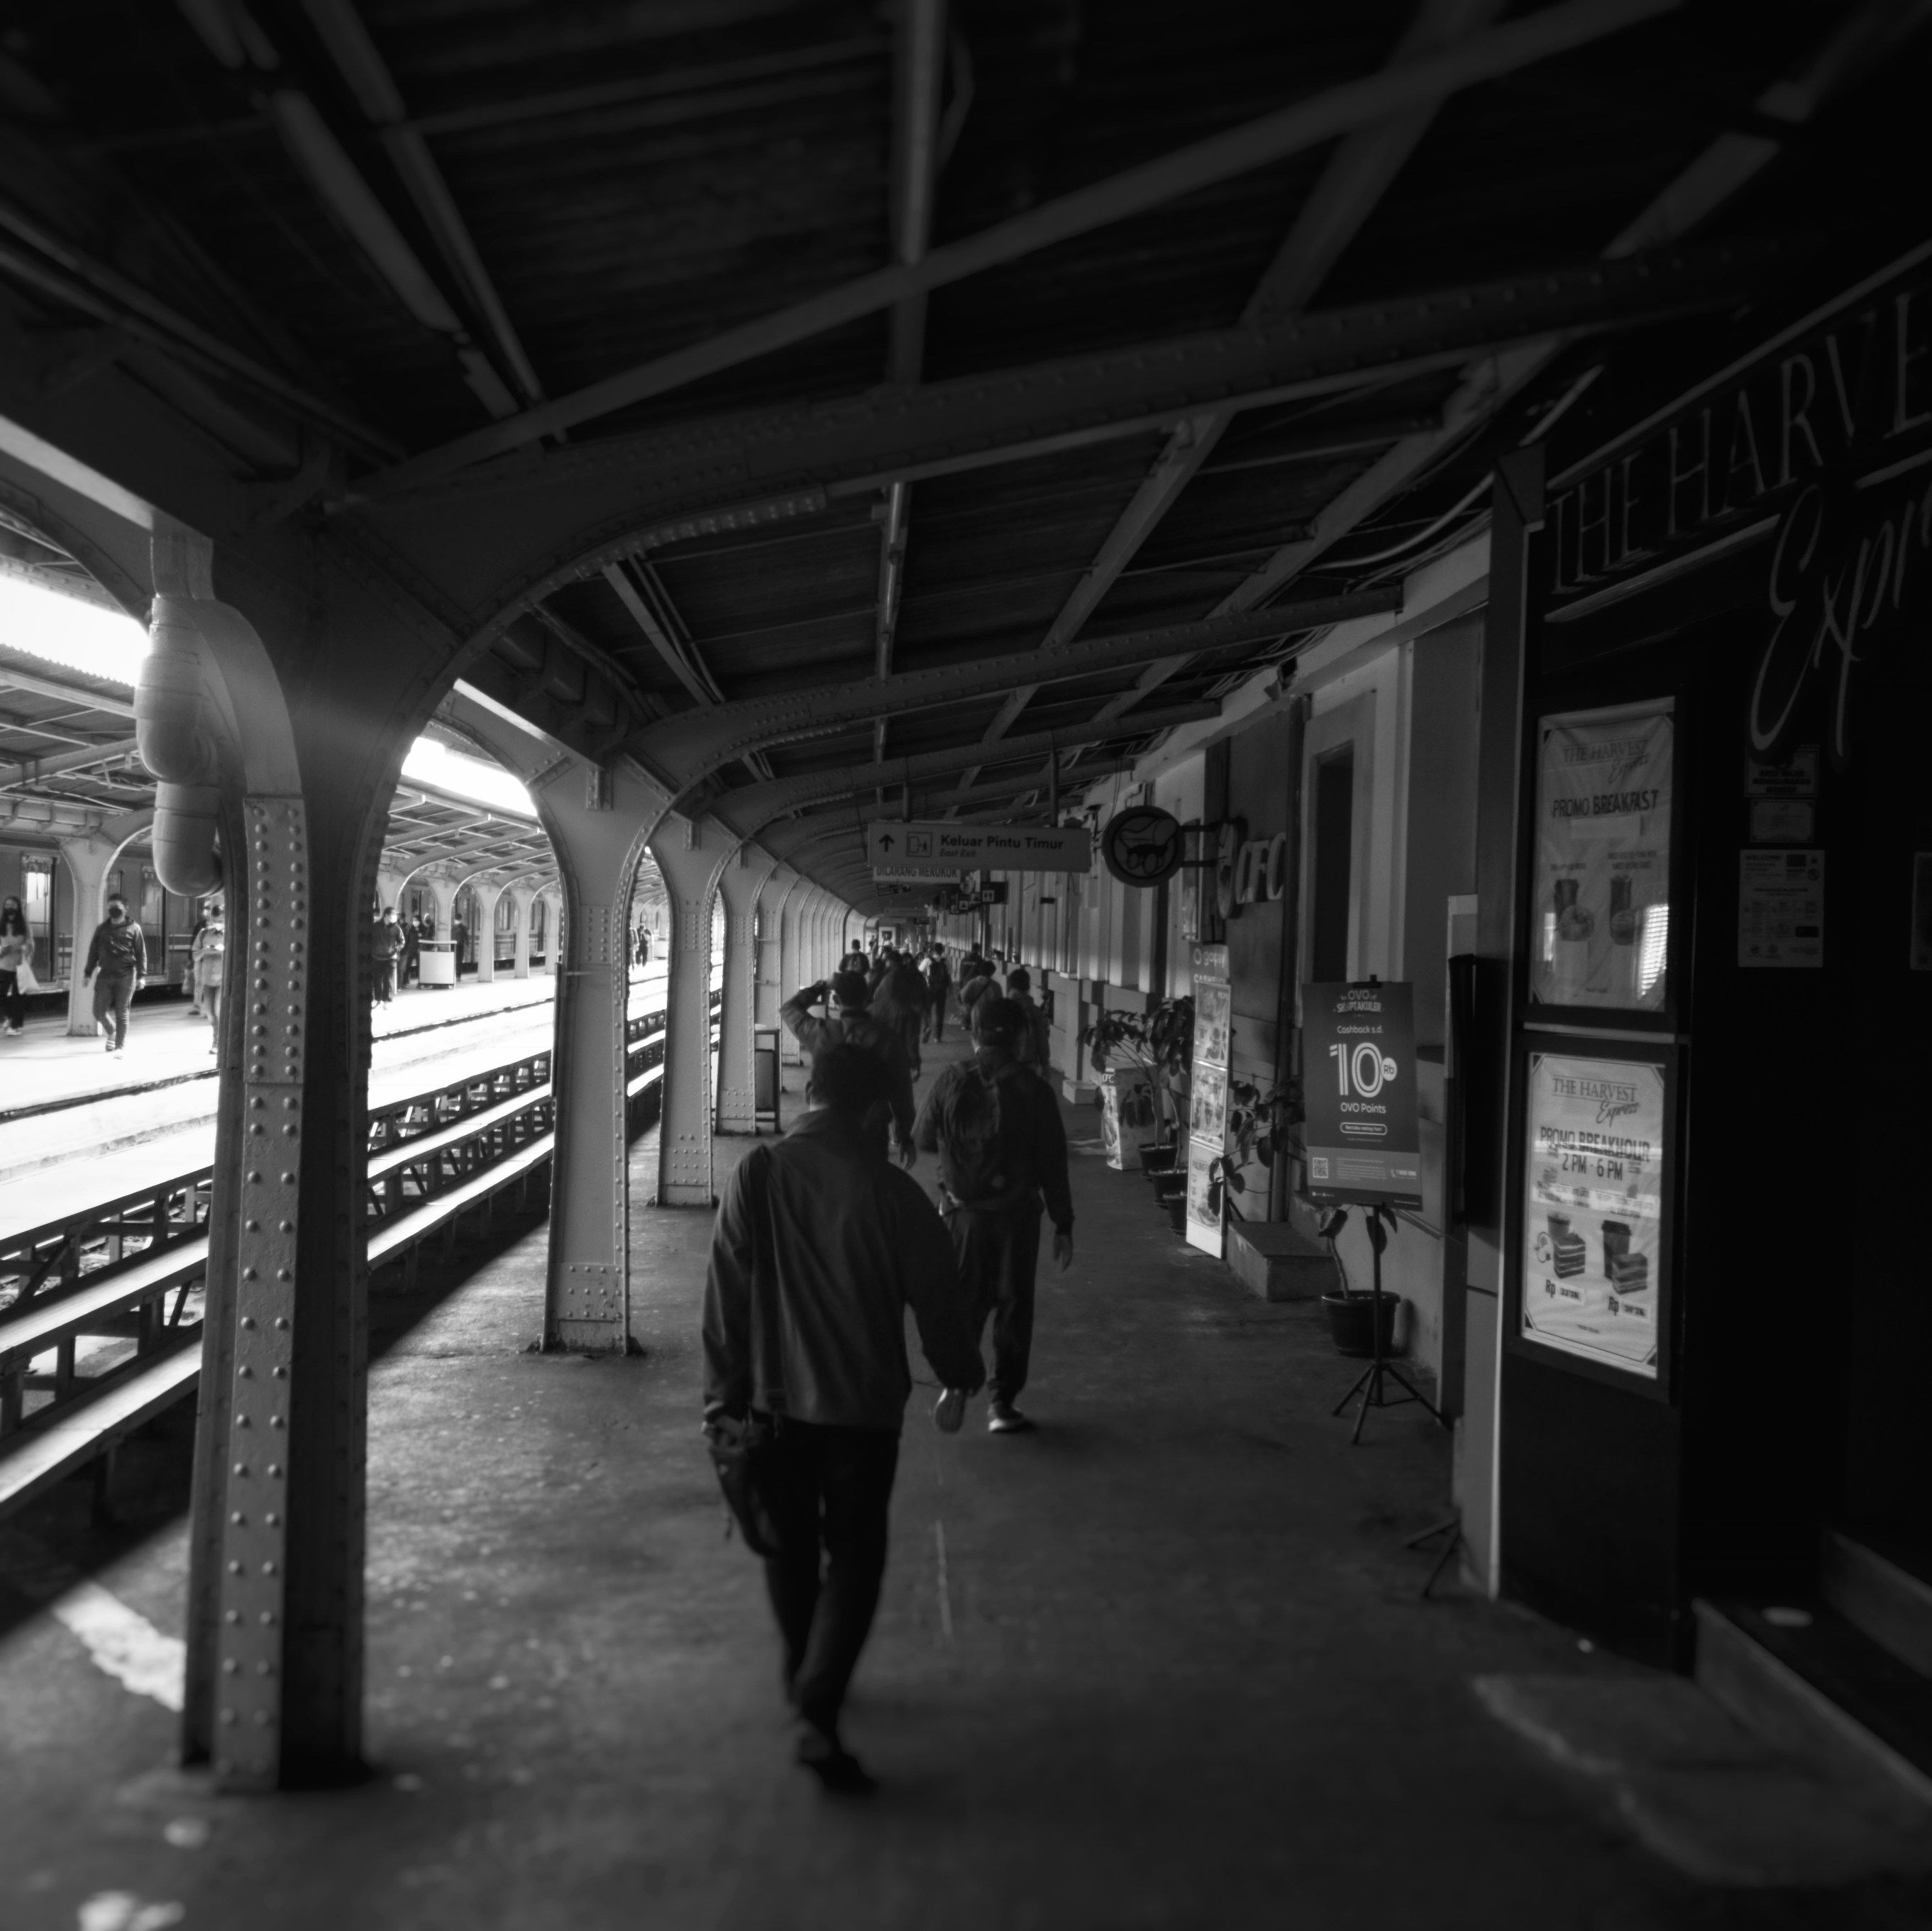 a black and white photo of people walking on a train platform